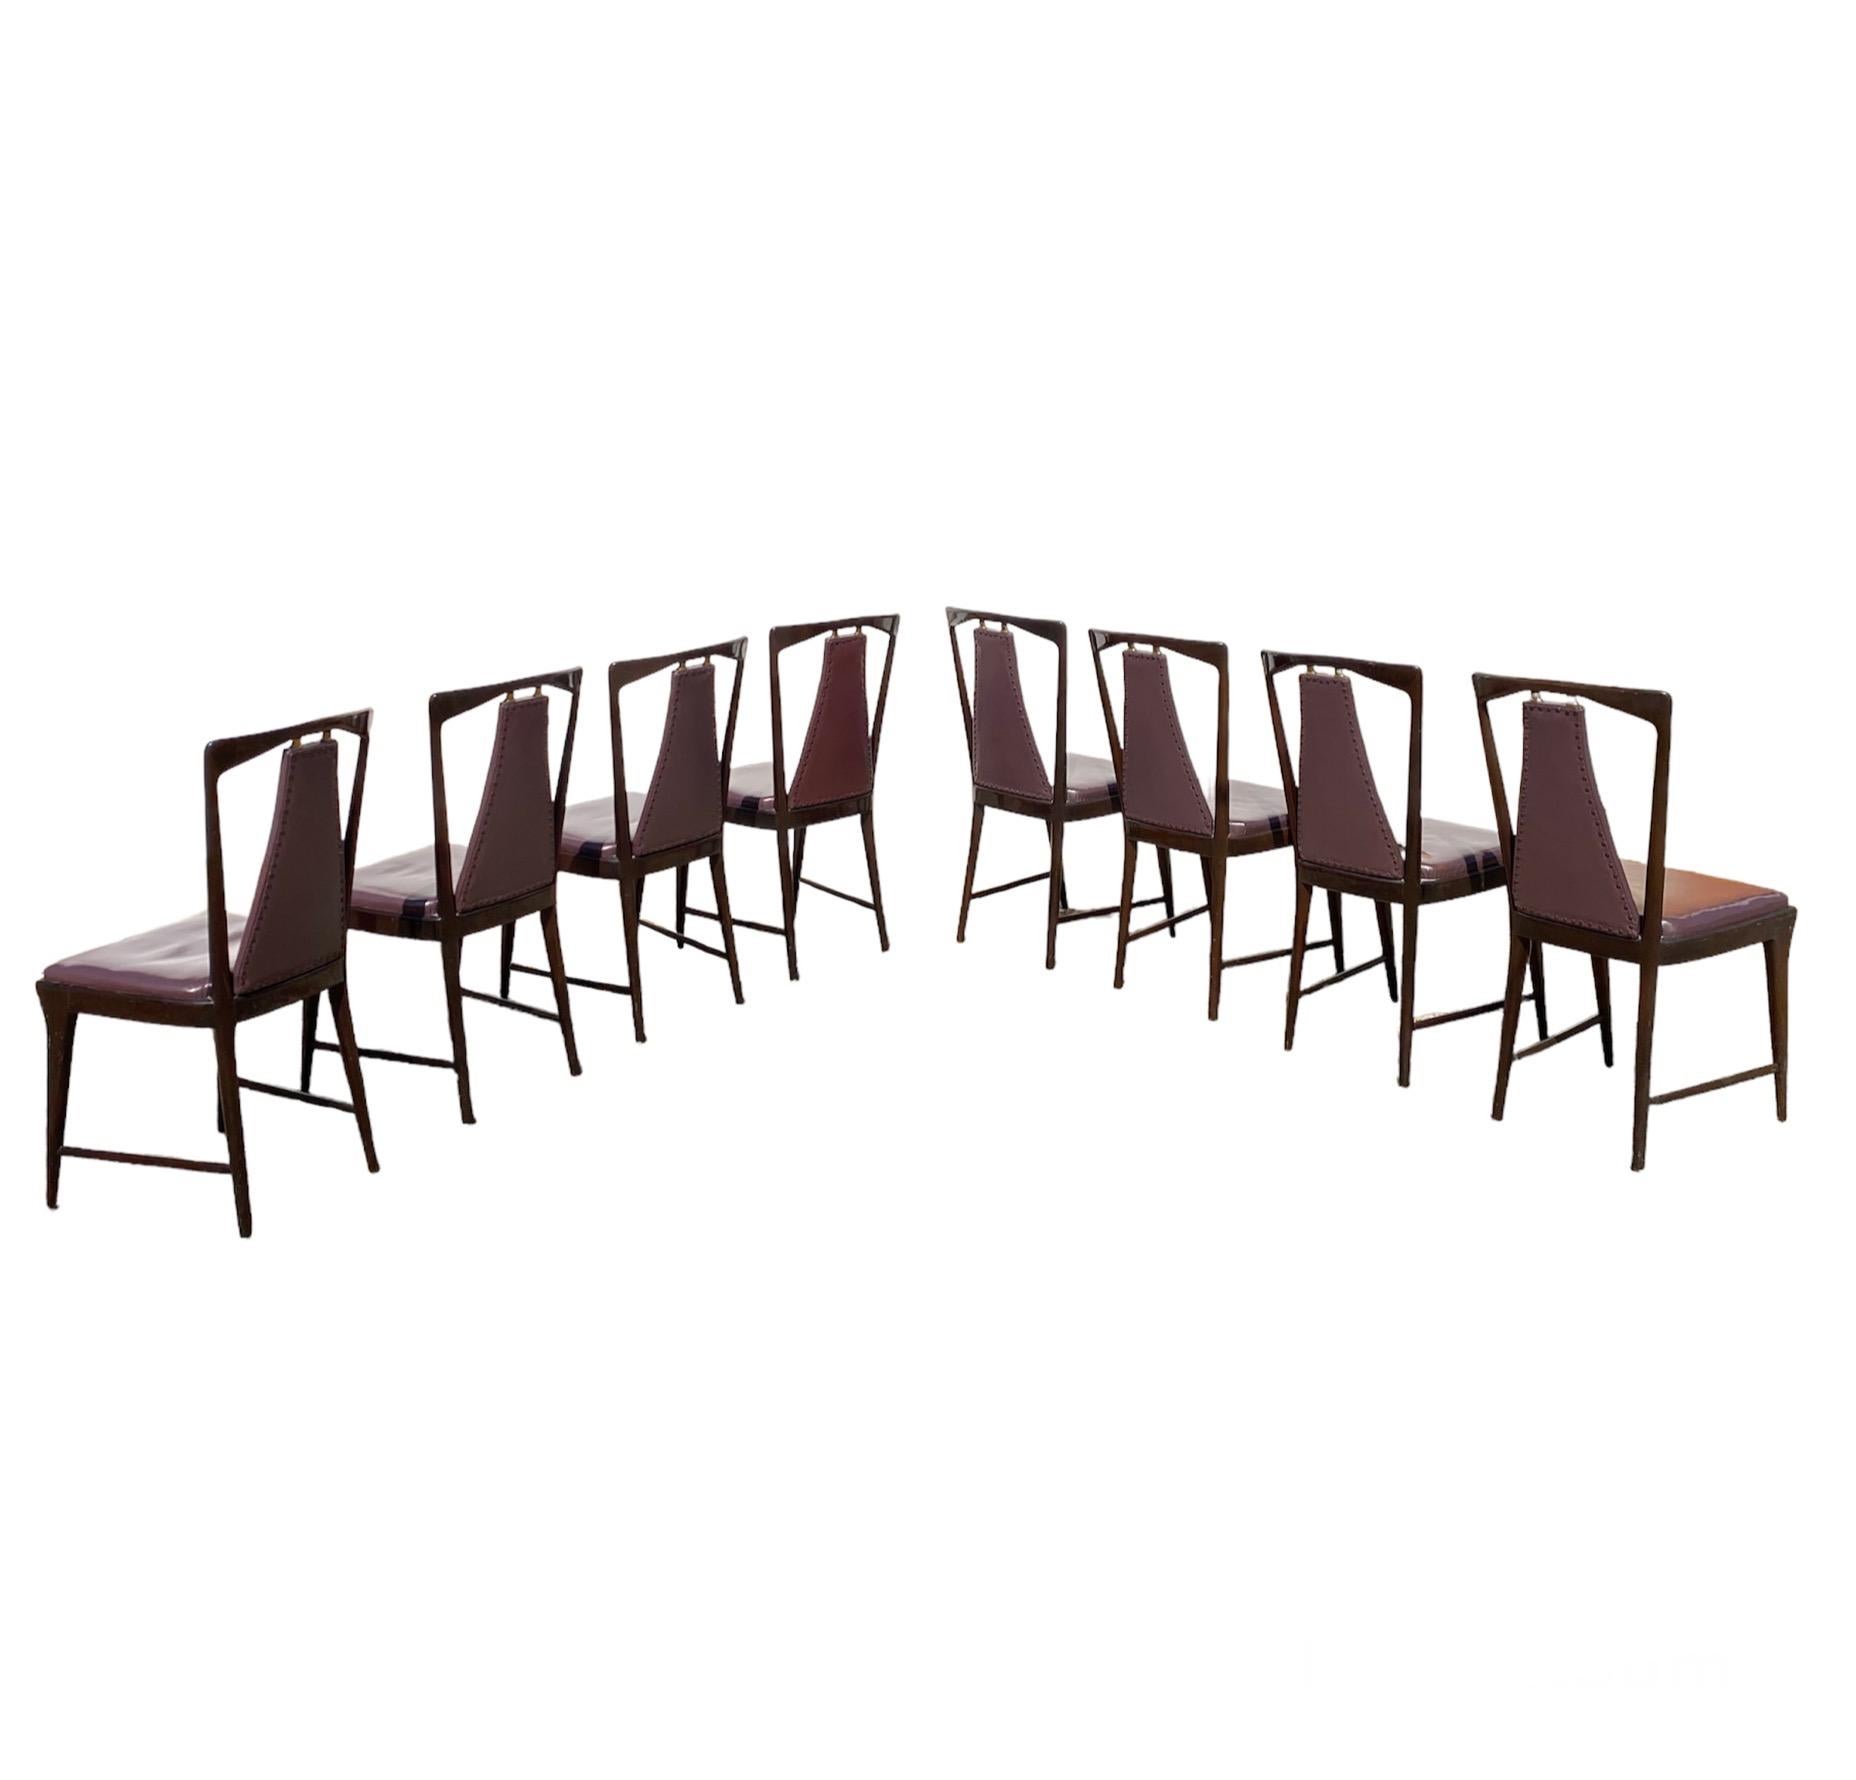 Amazing Set composed of eight iconic Mid-Century style chairs designed by Osvaldo Borsani for Atelier Borsani Varedo, 1940's-1950's
 
The chairs are made in mahogany Beech Wood, with seats upholstered in Purple Skai fabric. 
The structure of the